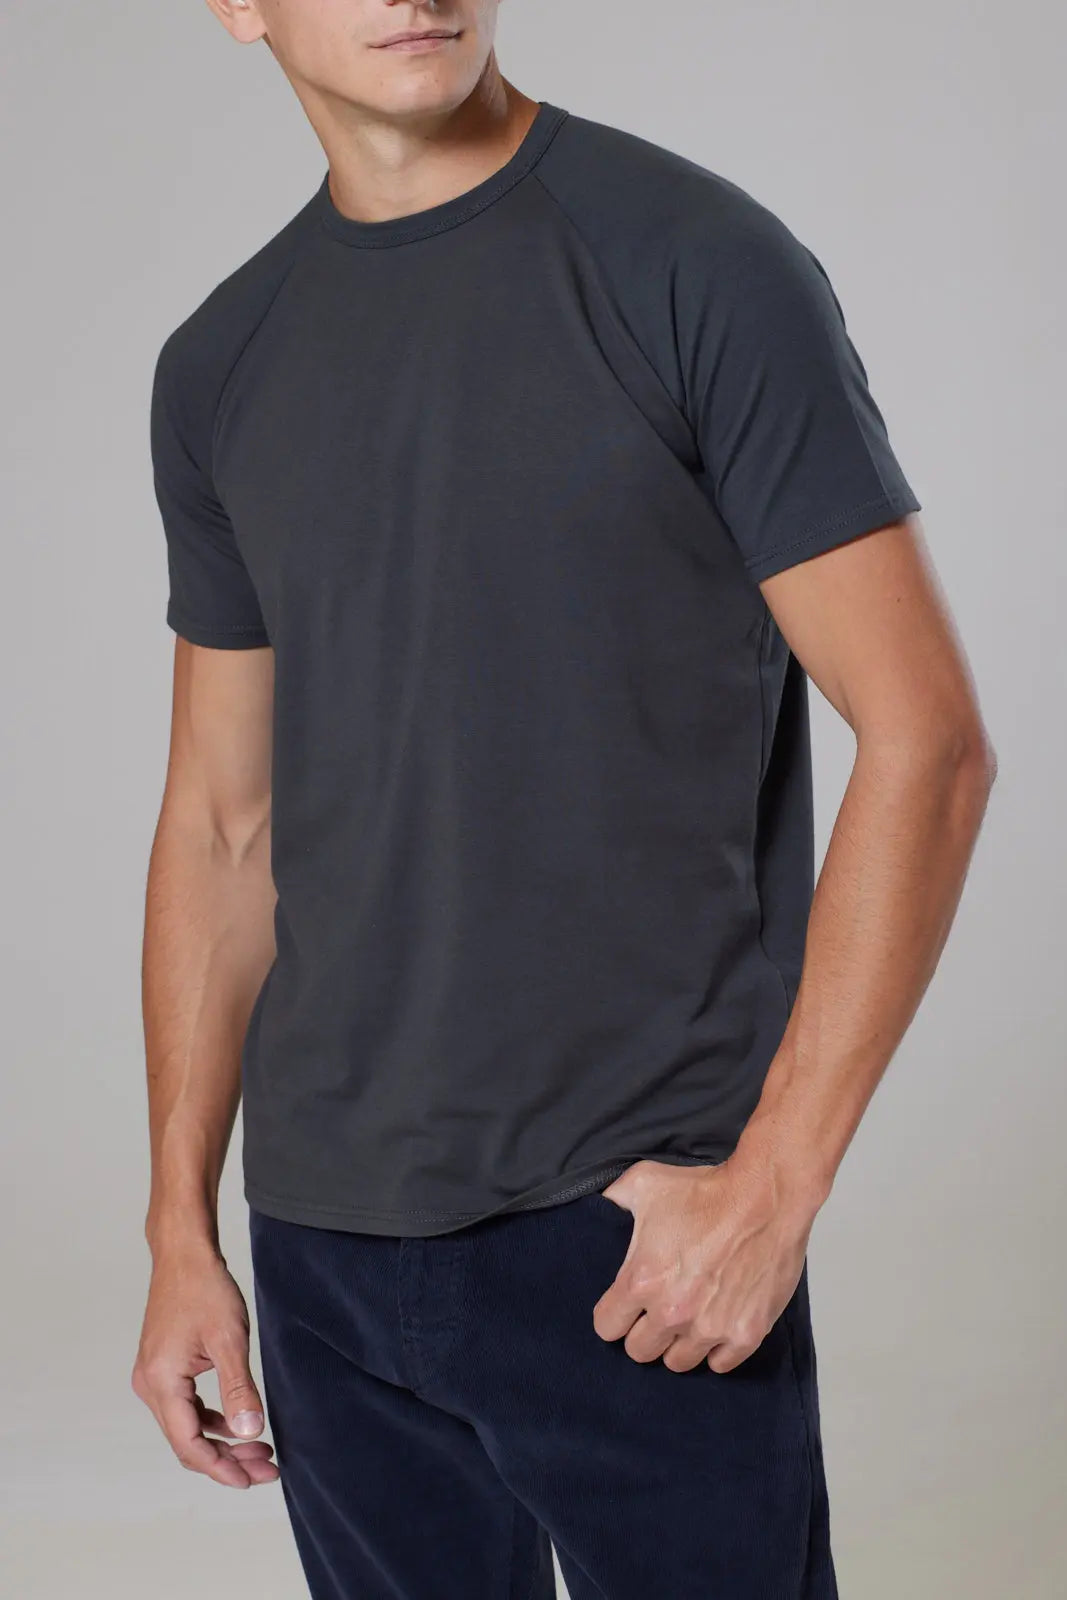 Stylish Hoxton Short Sleeve Cotton T-Shirt | Must-Have Apparel